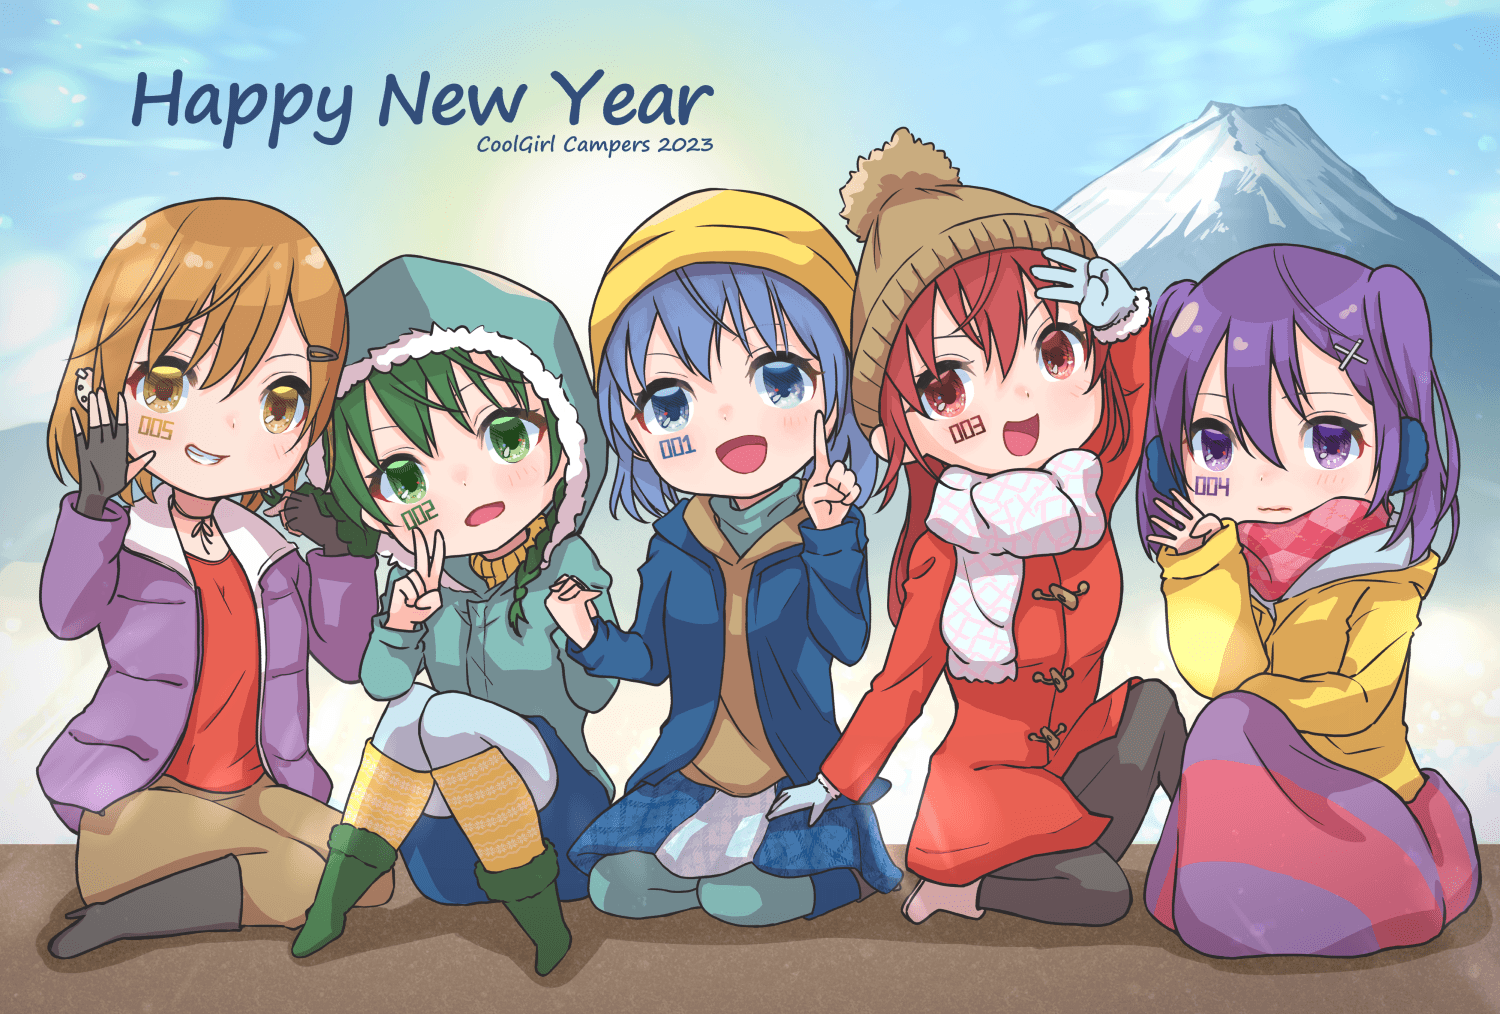 Happy New Year 2023-CG Campers